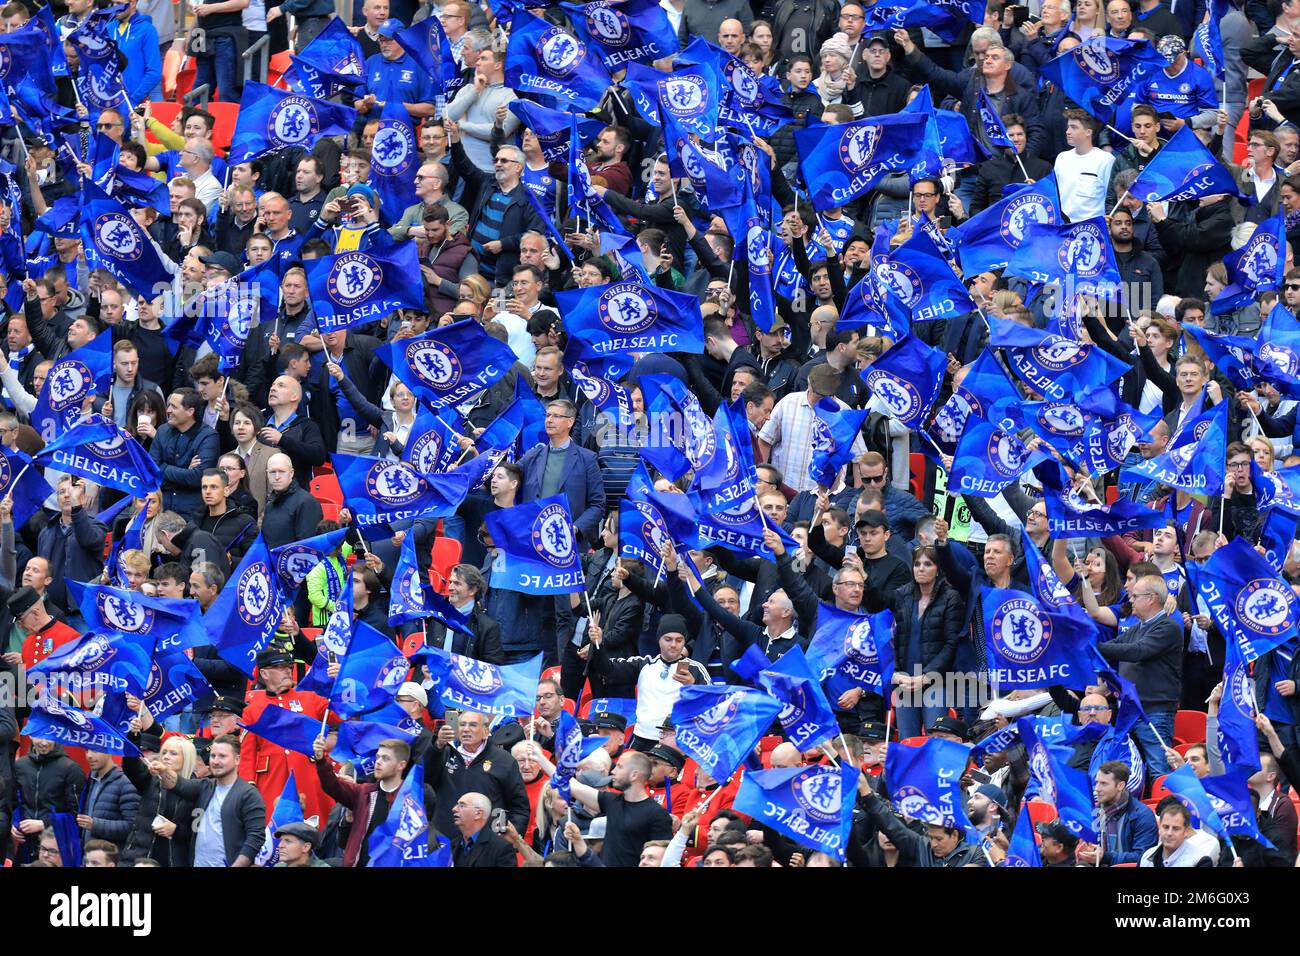 Chelsea fans with flags - Chelsea v Tottenham Hotspur, The Emirates FA Cup Semi Final, Wembley Stadium, London - 22nd April 2017. Stock Photo